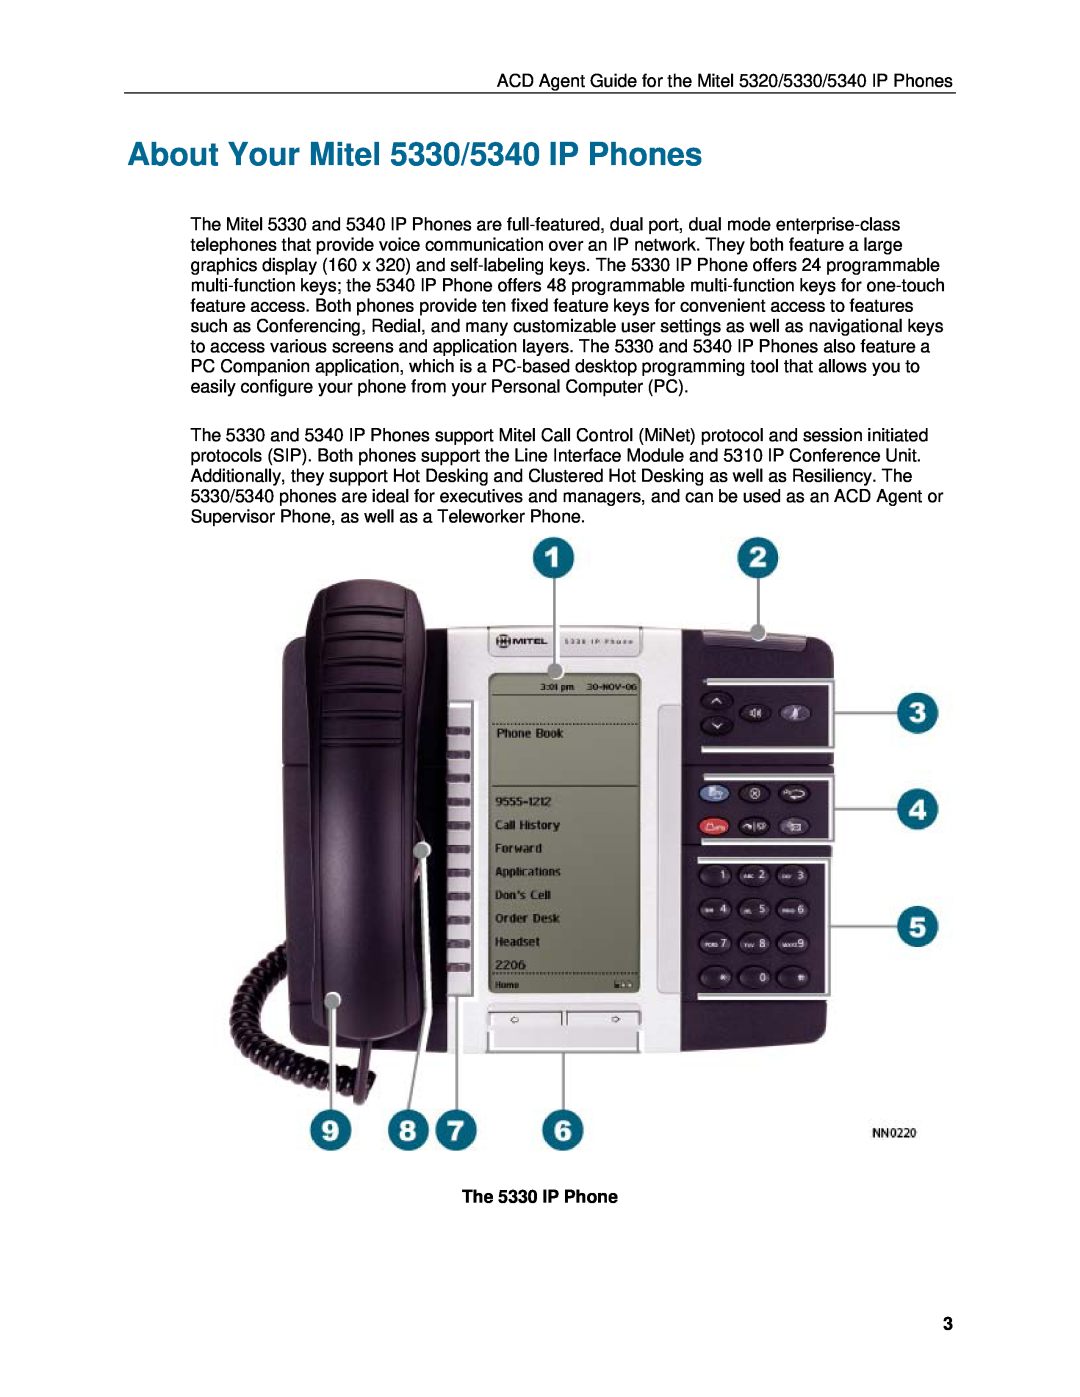 Mitel 5320 manual About Your Mitel 5330/5340 IP Phones, The 5330 IP Phone 